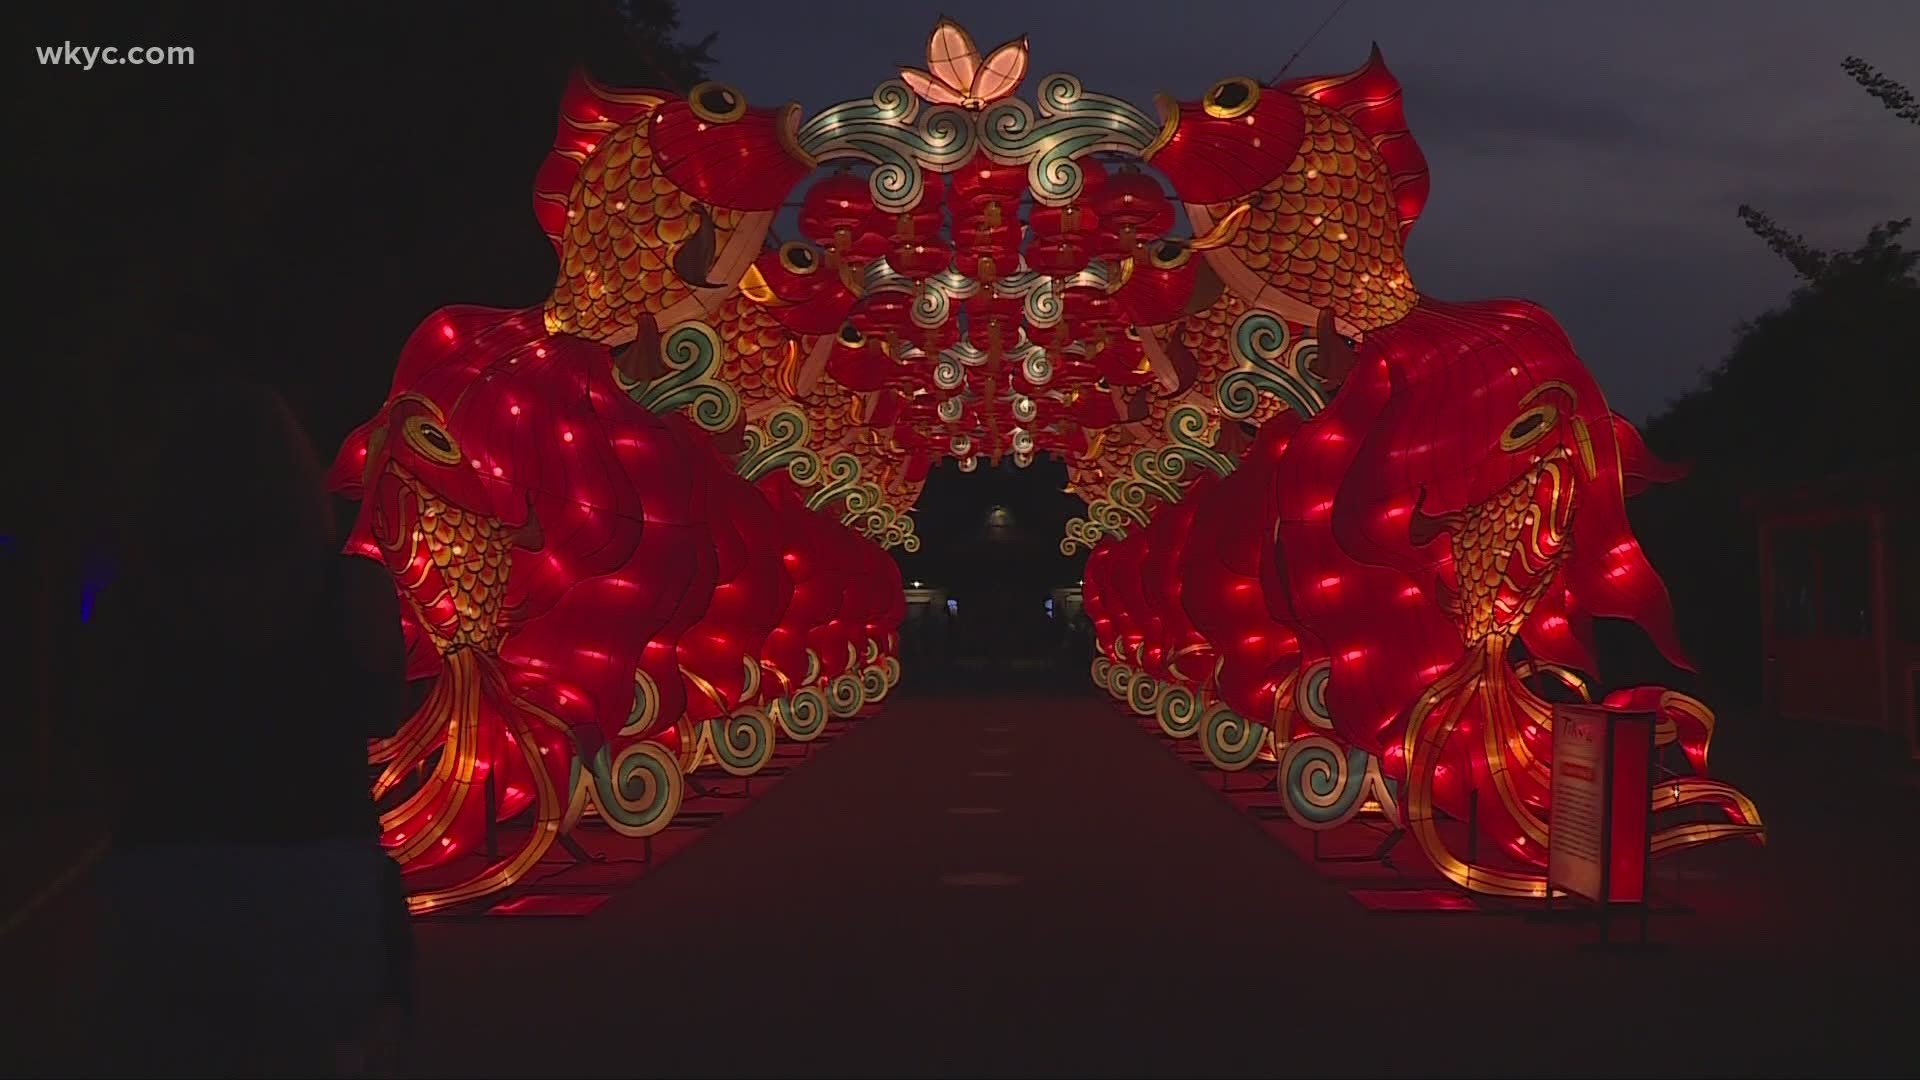 It's an explosion of bright colors and culture. 
The Asian Lantern Festival is lighting up the Cleveland Metroparks zoo. Laura Caso has the details.